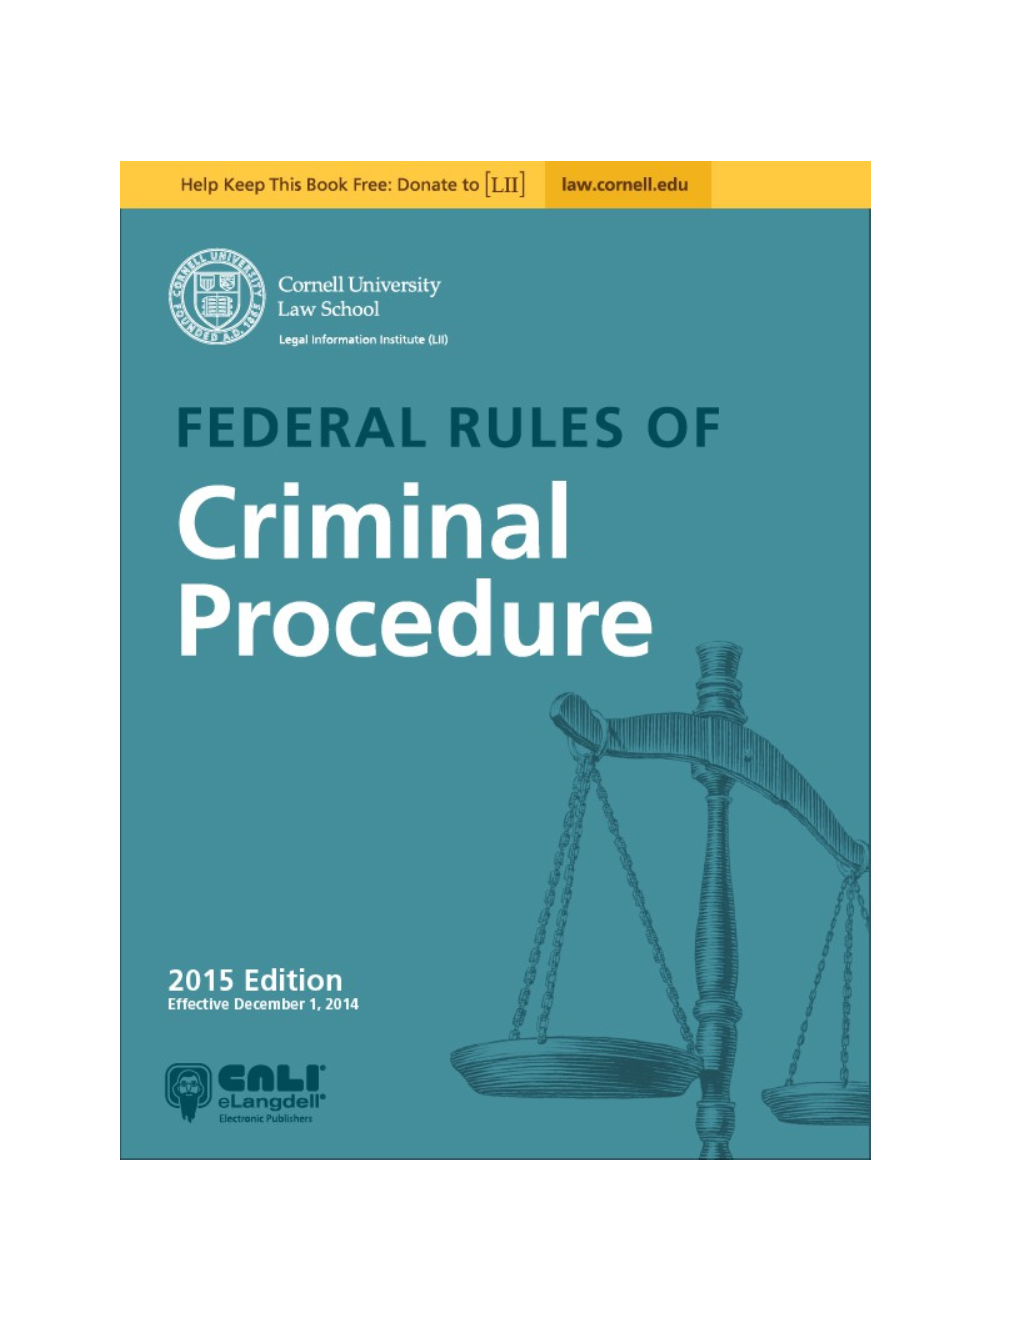 Federal Rules of Criminal Procedure, 2015 Edition